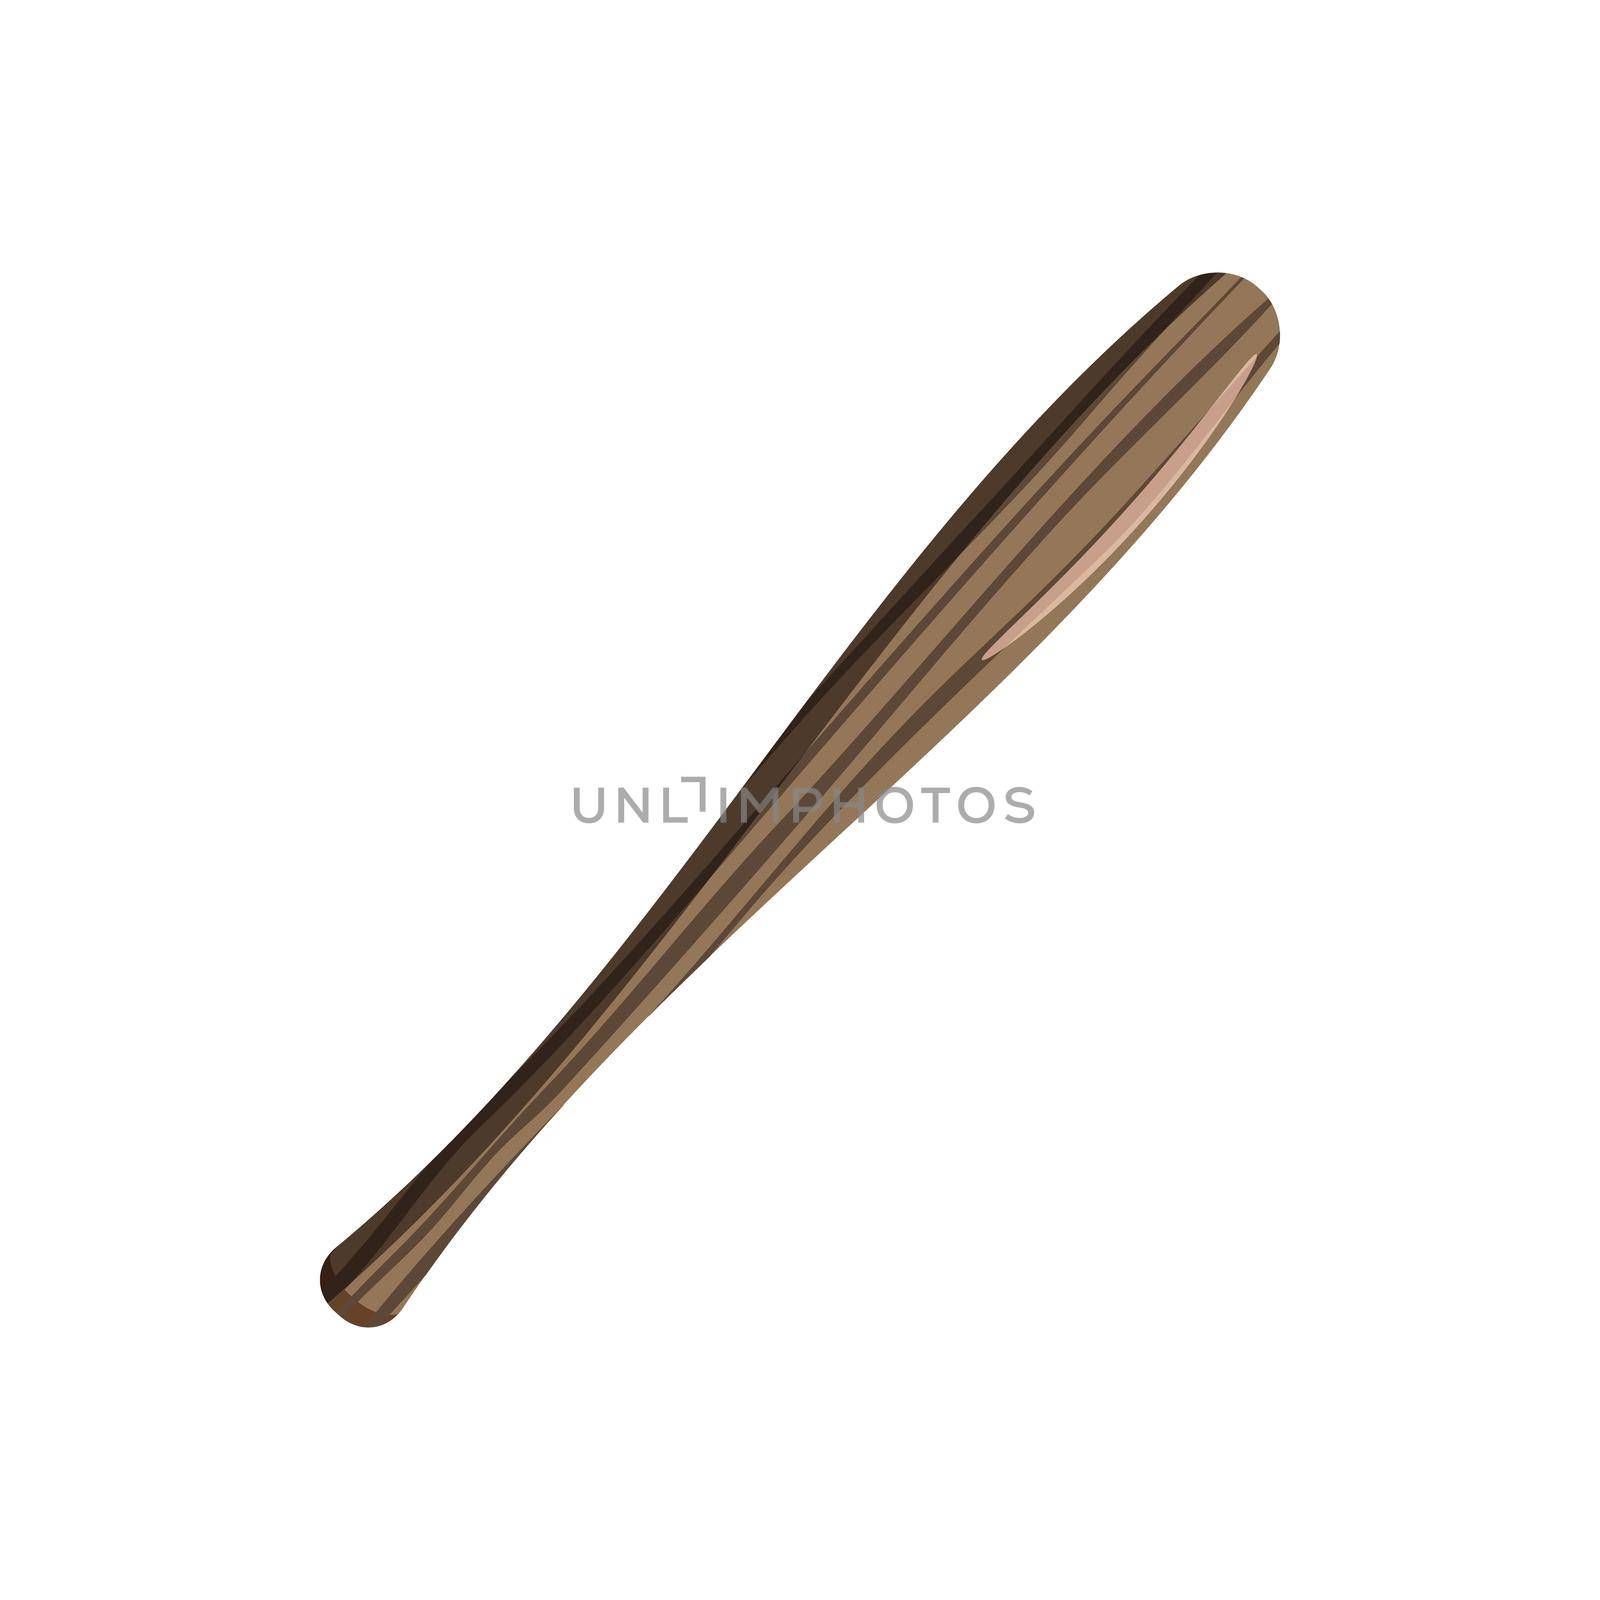 Baseball bat icon in cartoon style on a white background